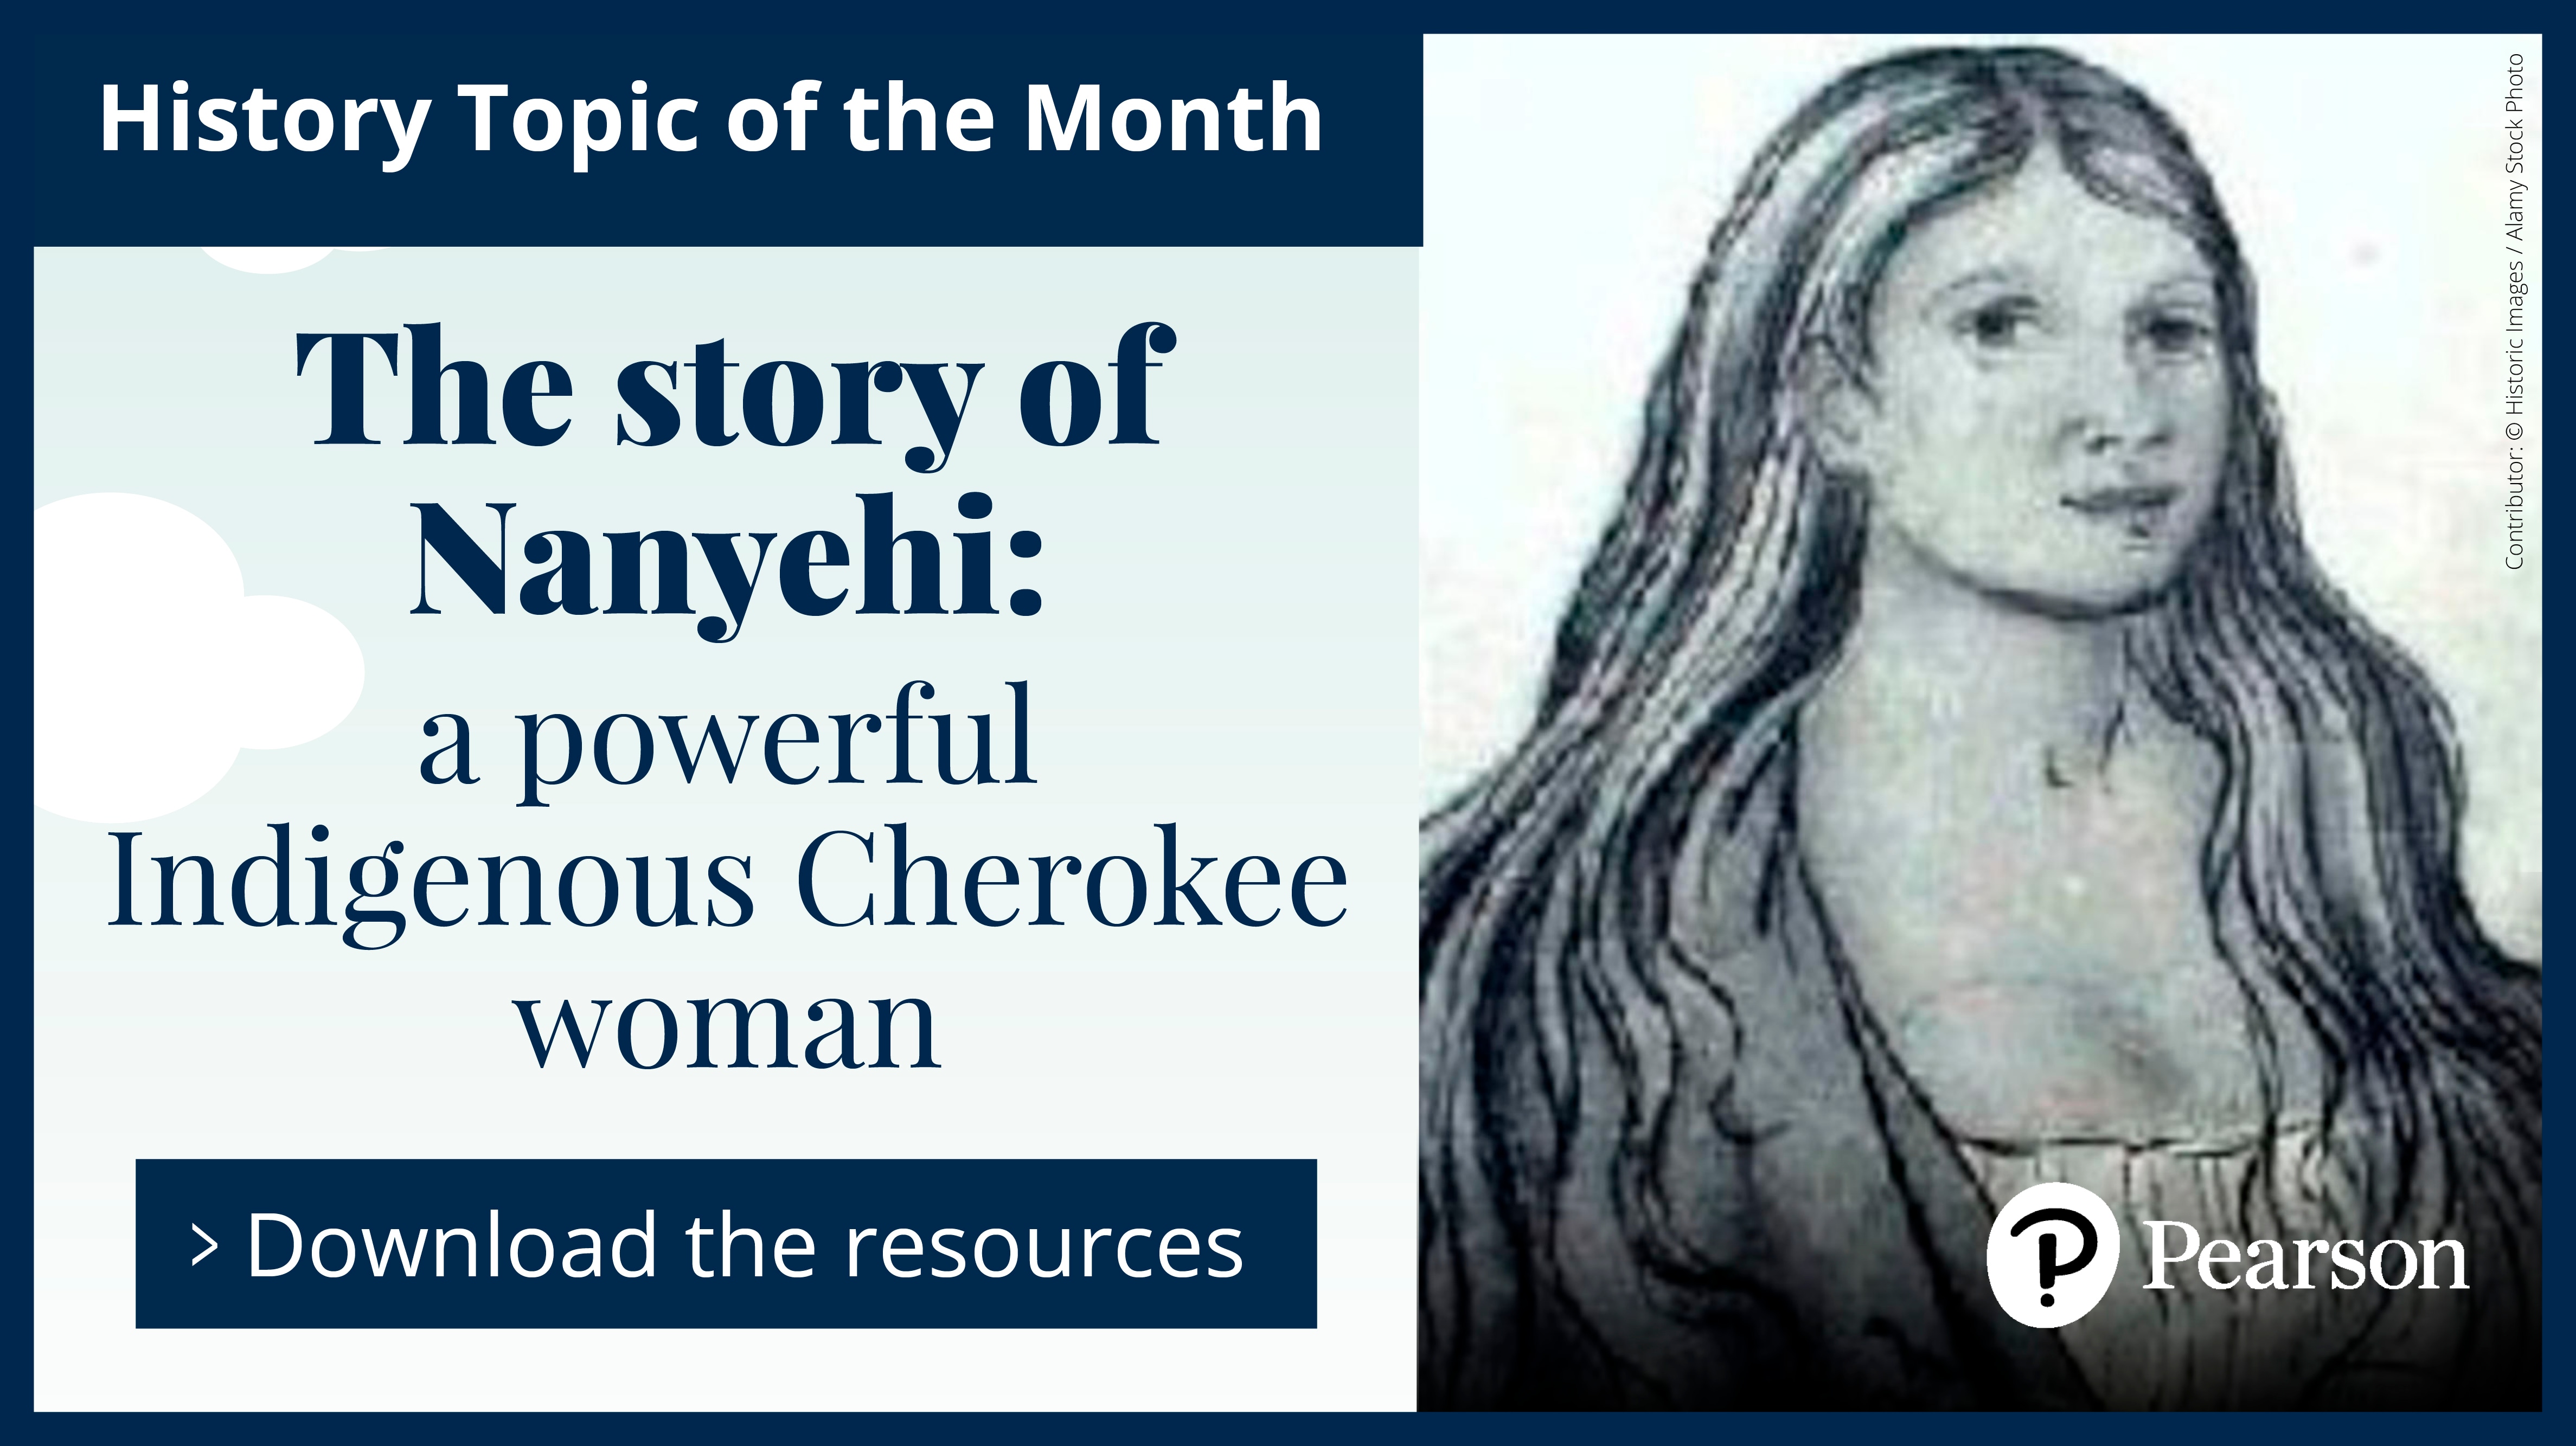 The story of Nanyehi: a powerful Indigenous Cherokee woman